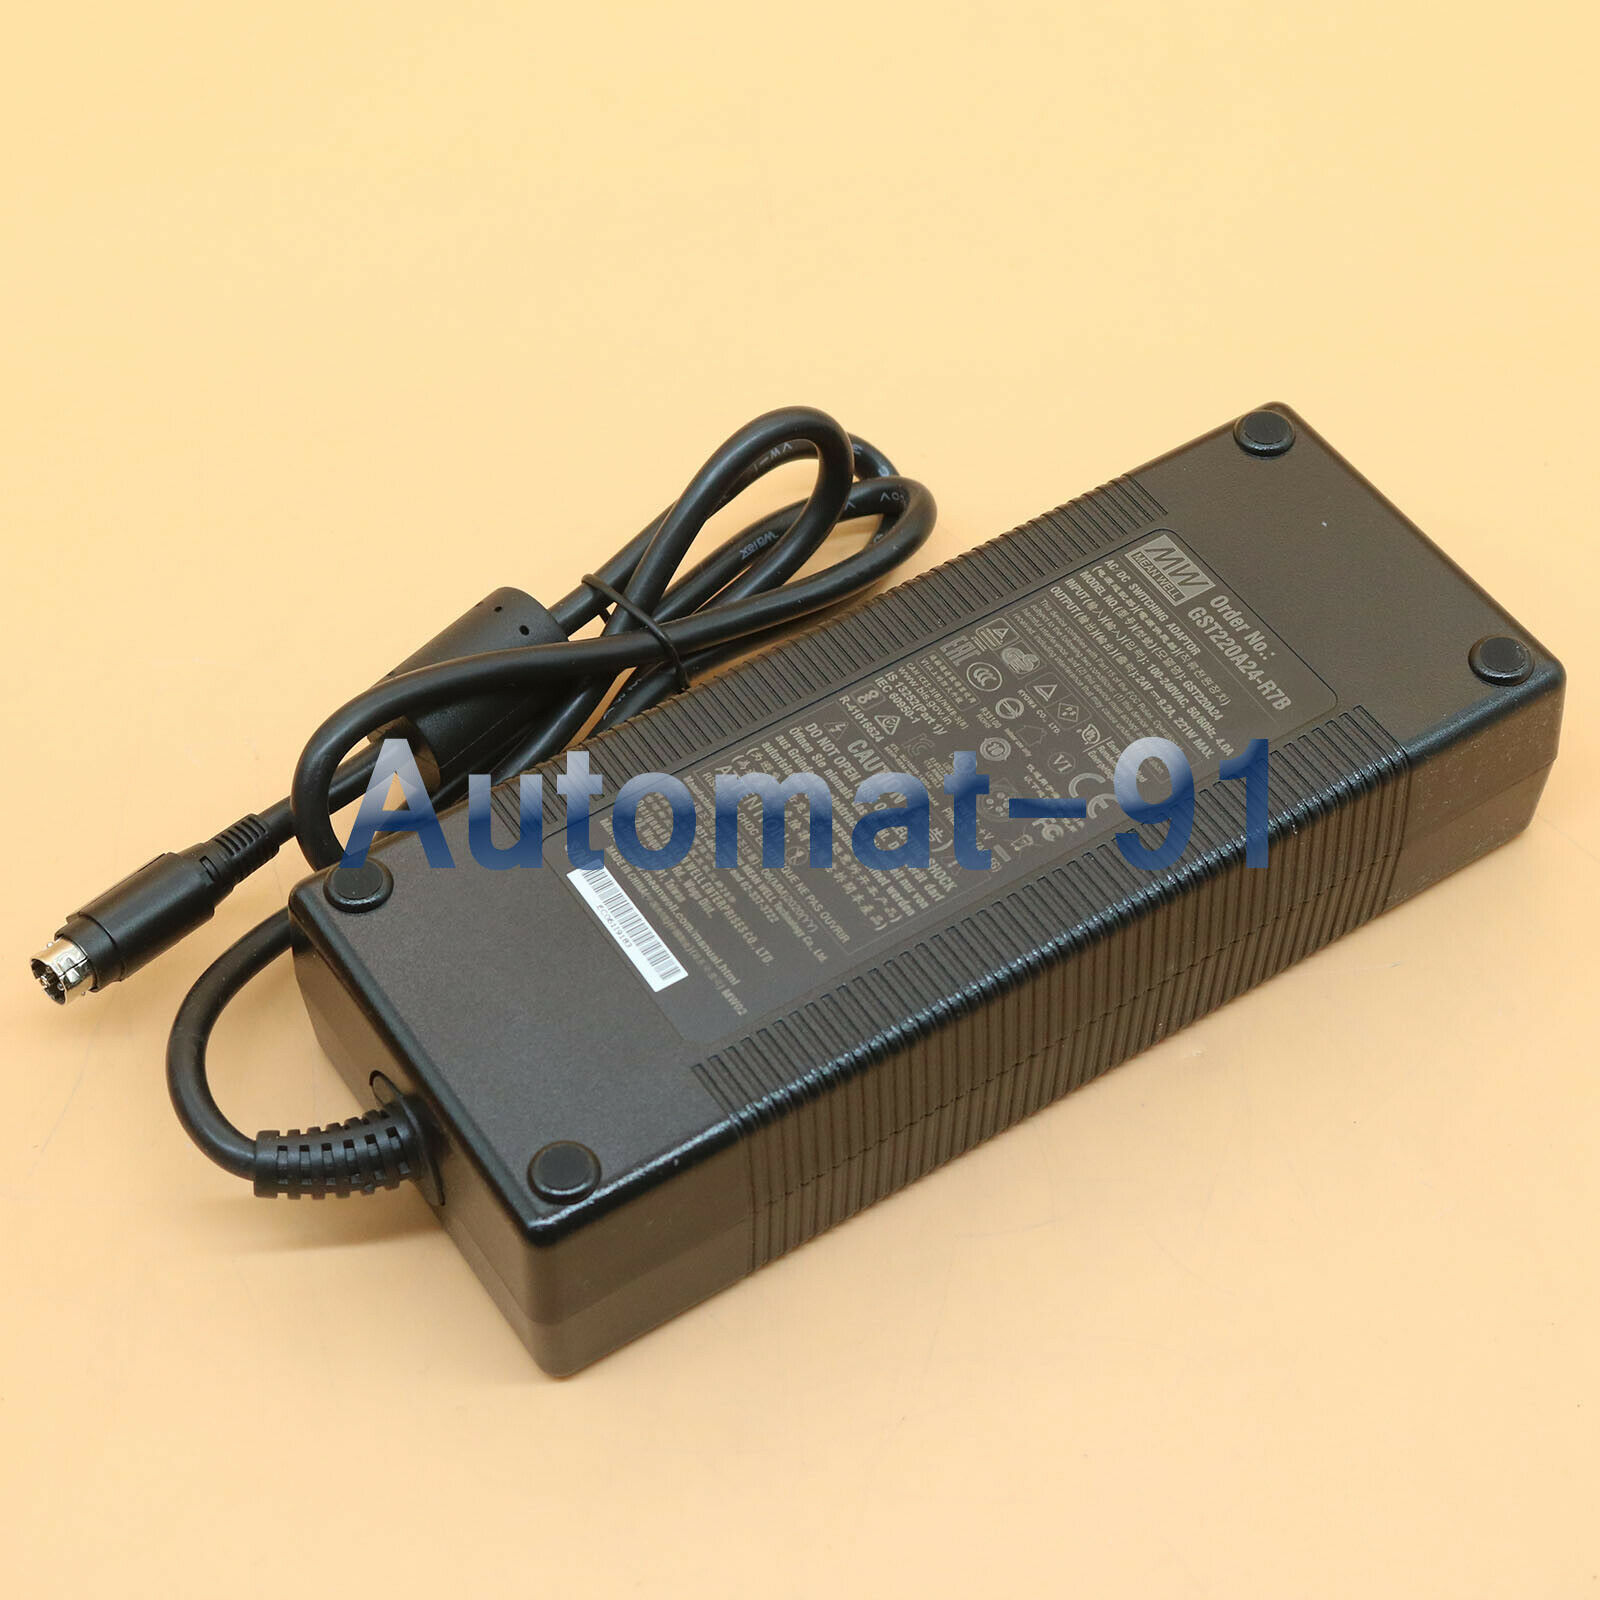 1PCS NEW Mean Well Power Supply GST220A24-R7B Model: GST220A24-R7B MPN: GST220A24-R7B Brand: Mean Well 1PCS NEW Me